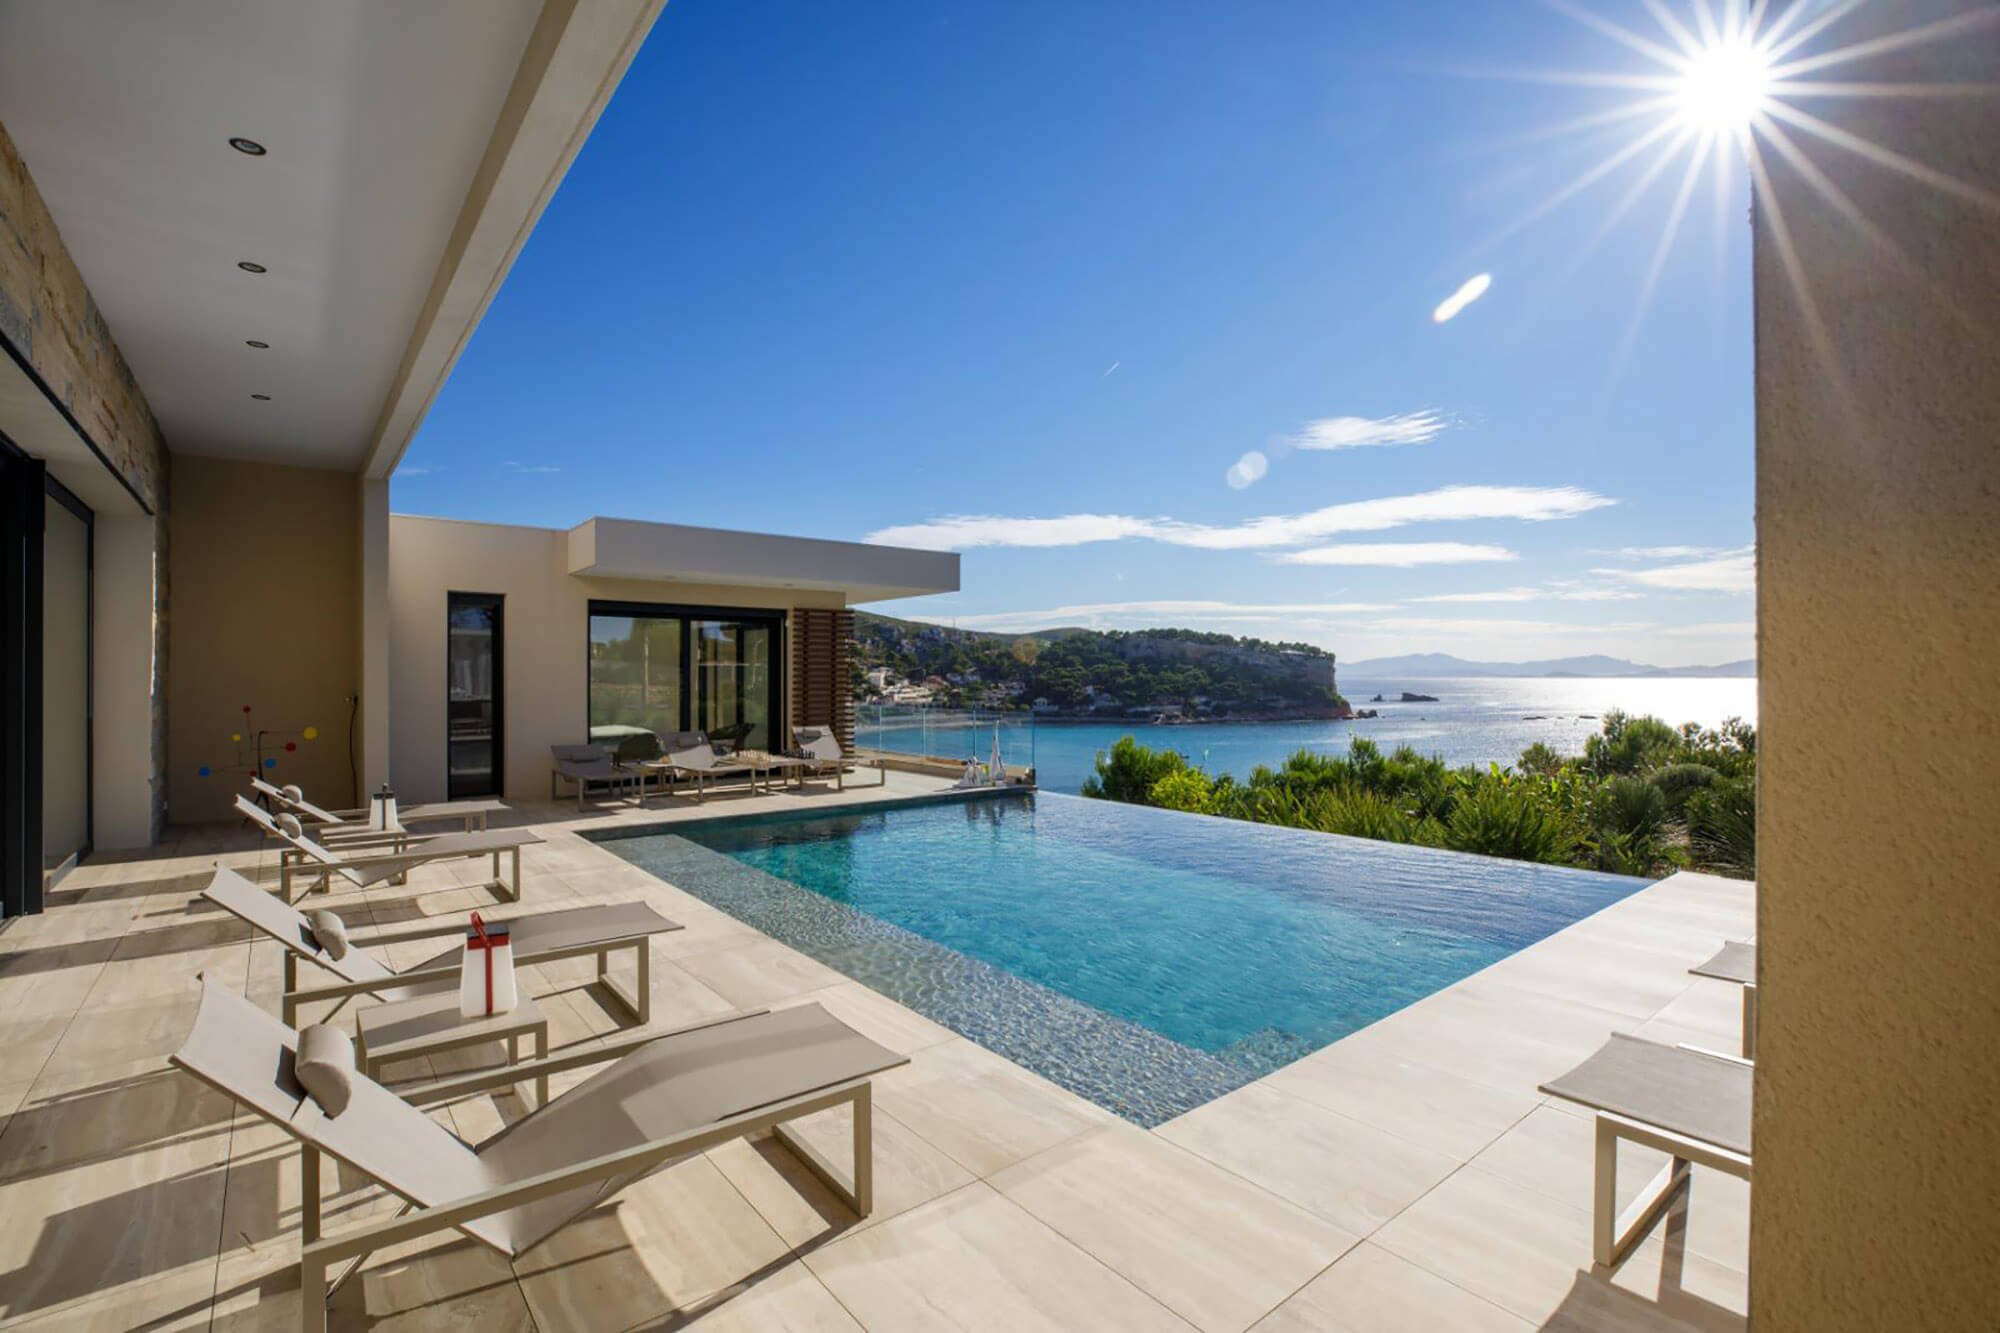 Luxury villa on the Côte d'Azur and the Mediterranean, sea view and swimming pool